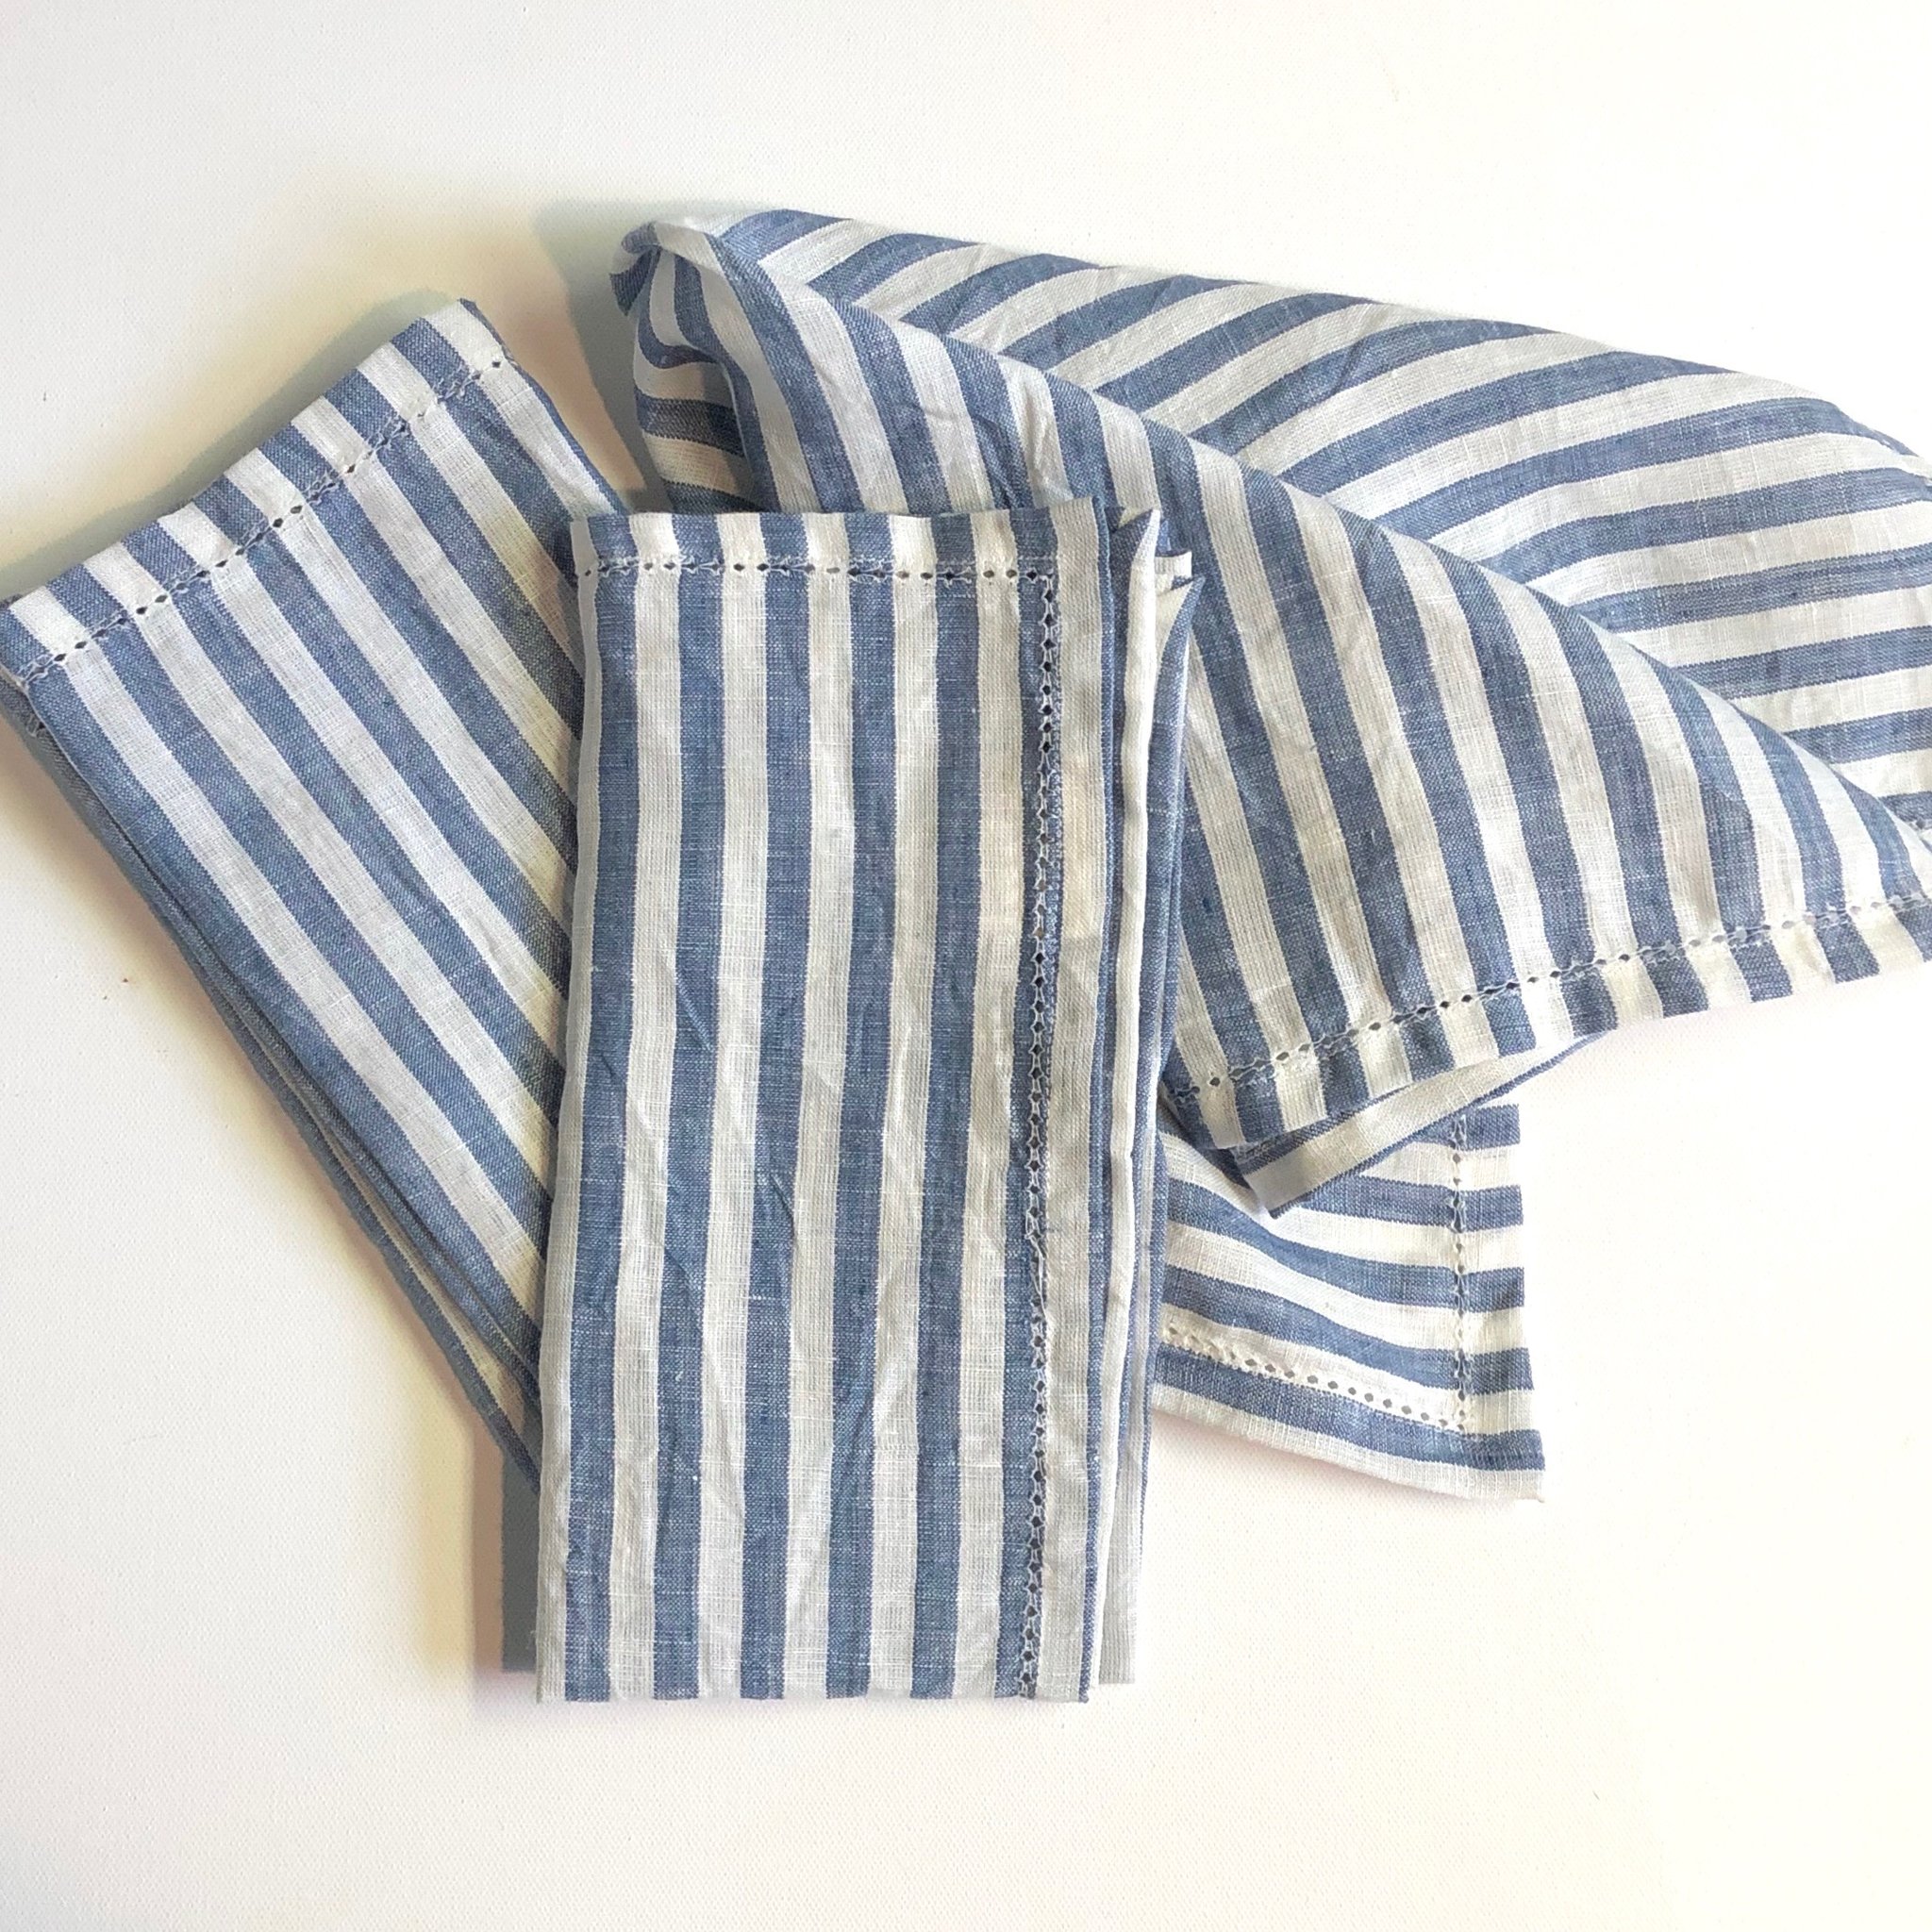 Blue and White Striped Napkins from Simple Pleasures in Providence, RI